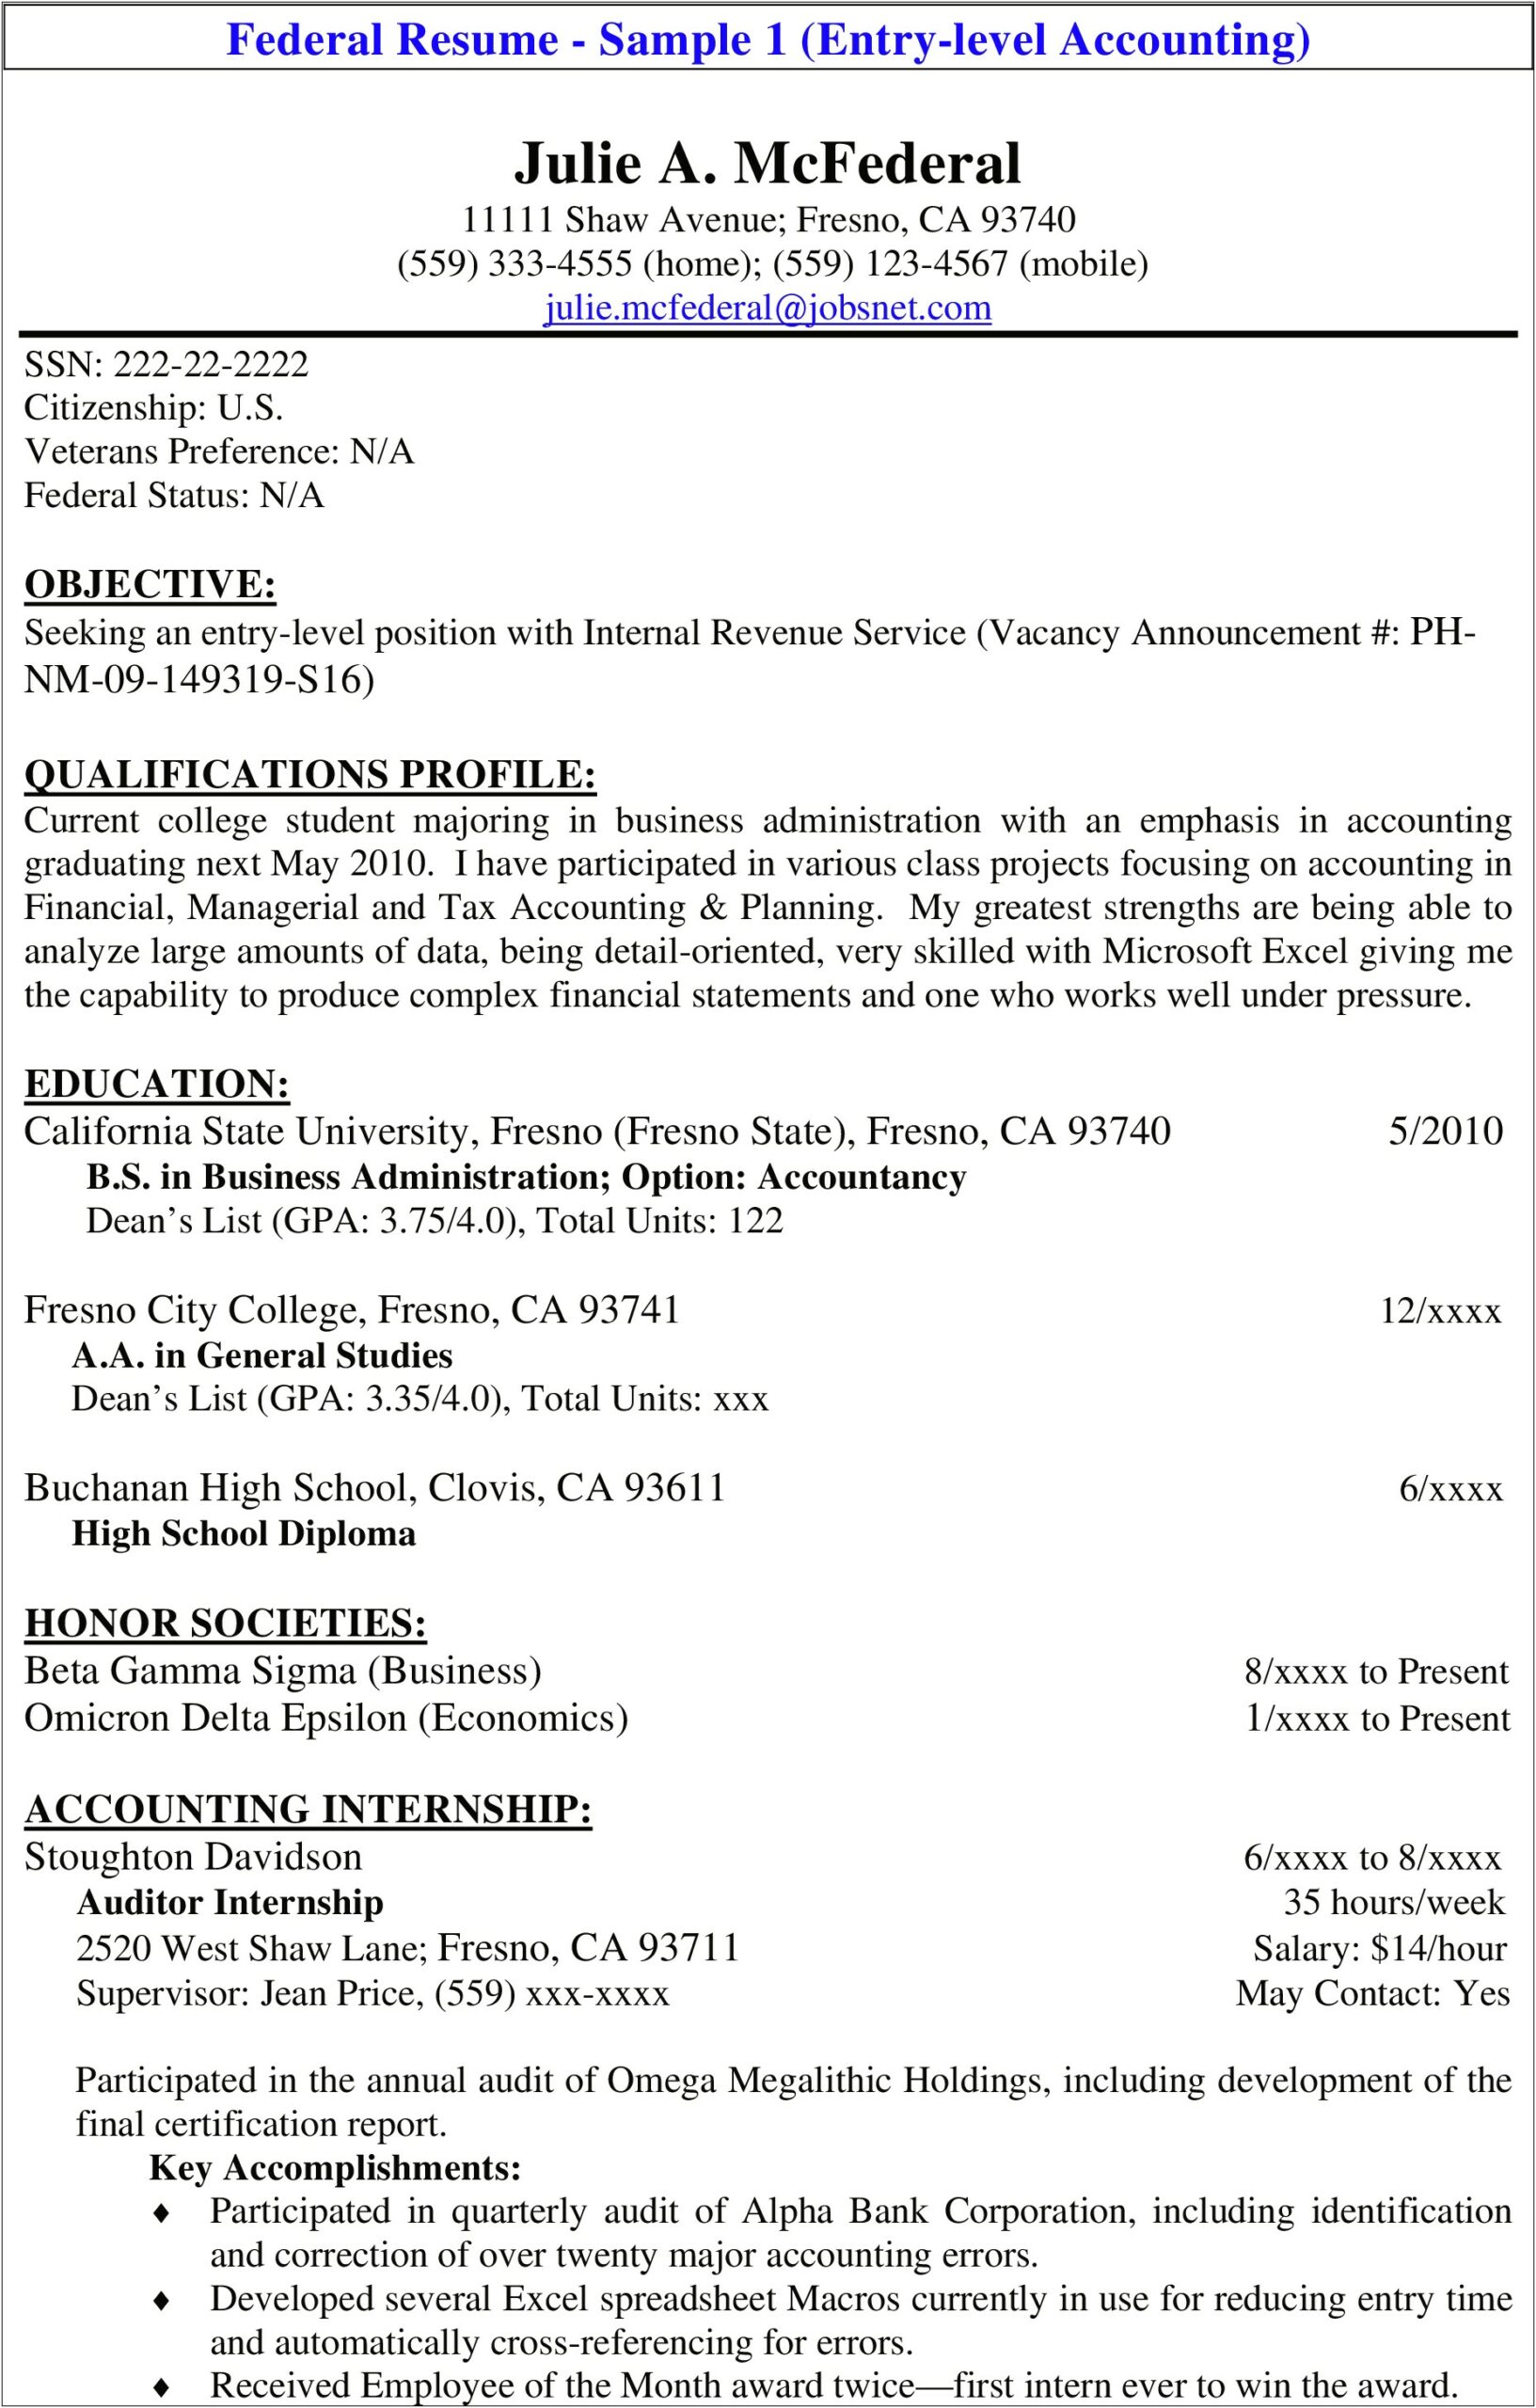 Cv Templates For Accountant Free Download